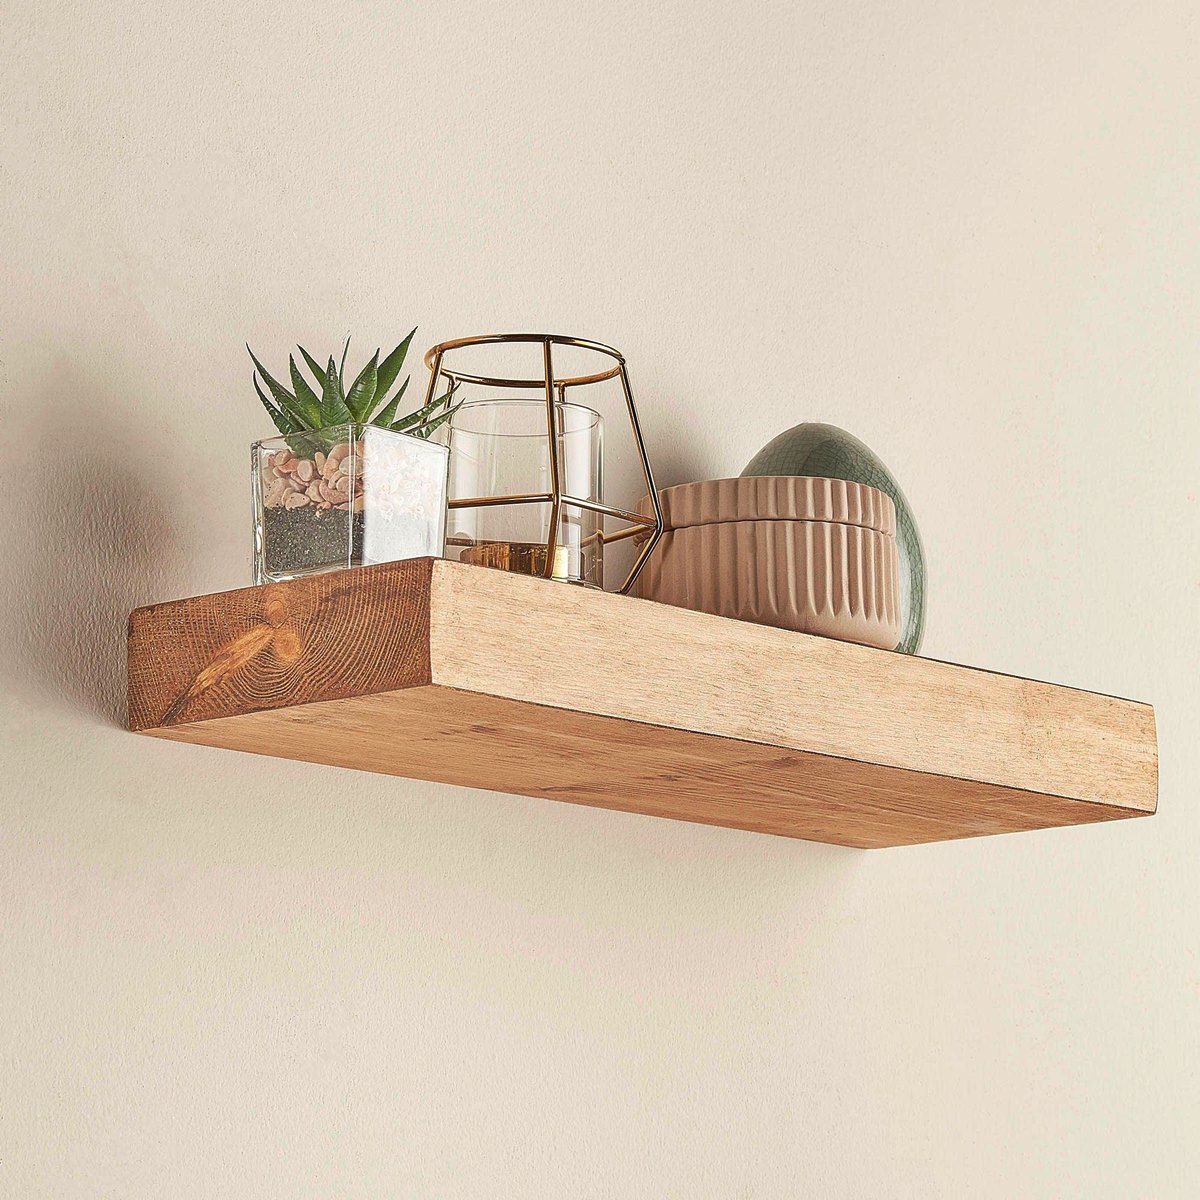 How To Take A Floating Shelf Off The Wall